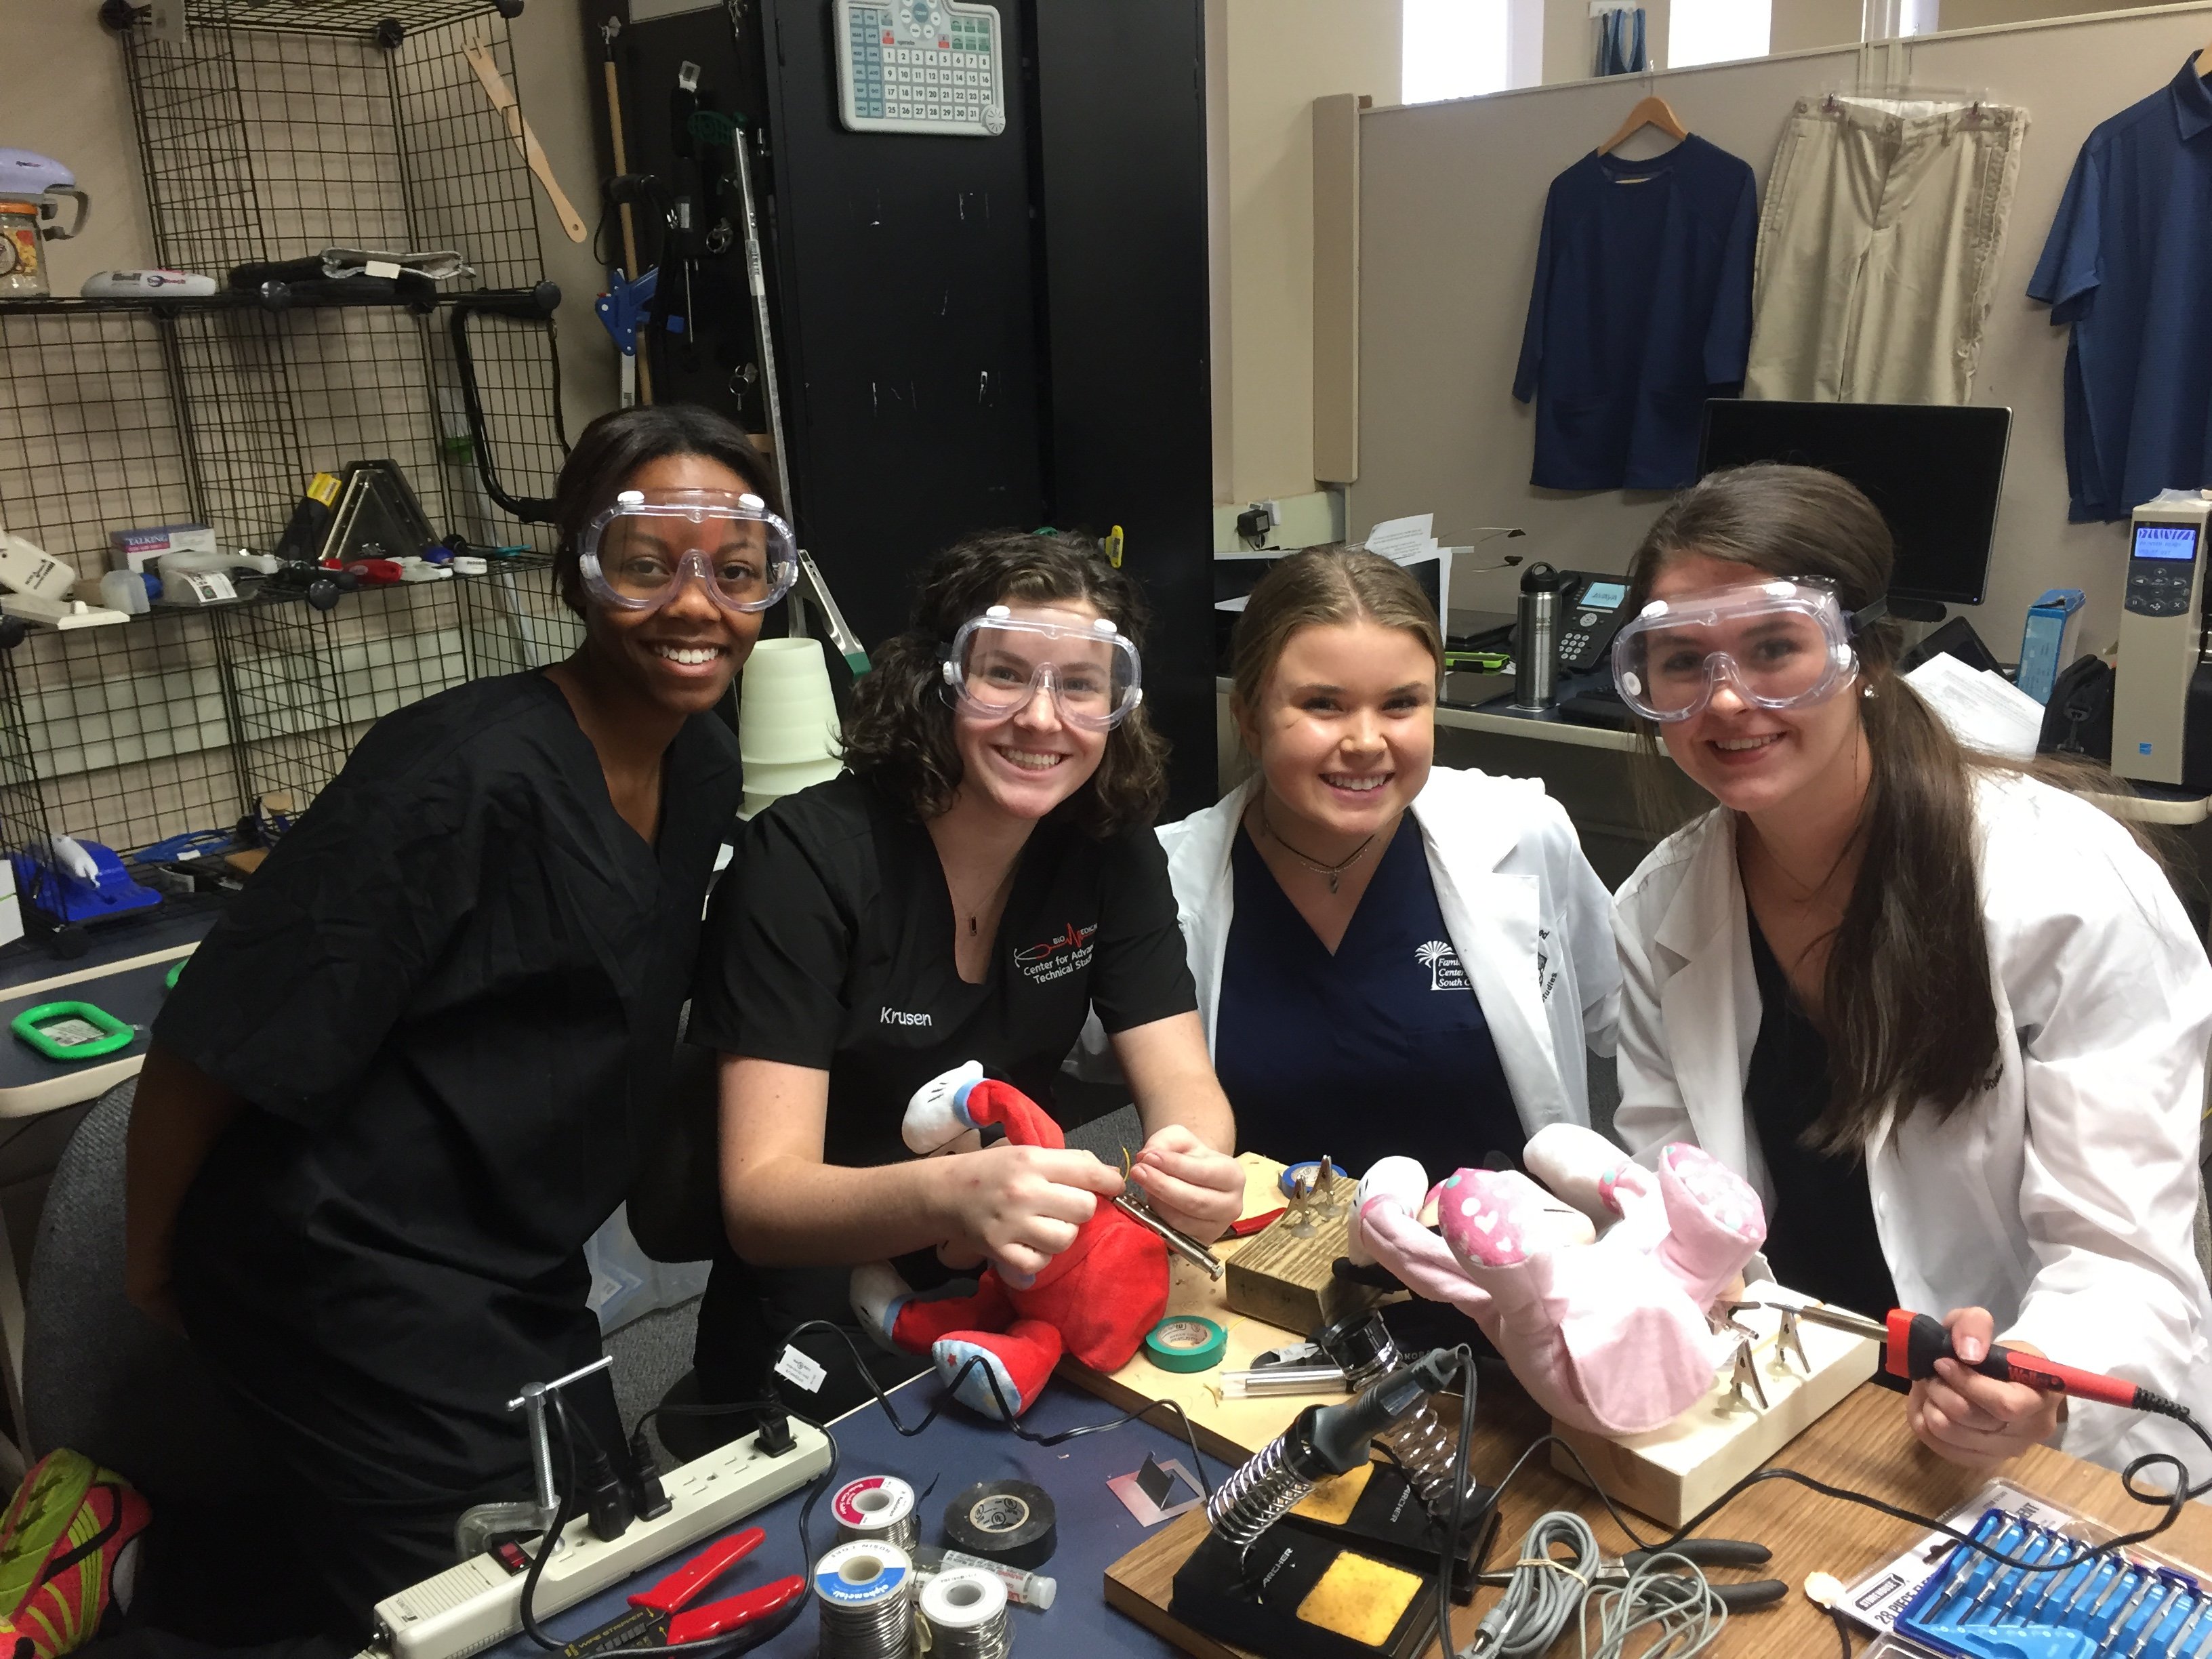 Four young women working at a workbench with soldering irons and plush toys smile for the camera.